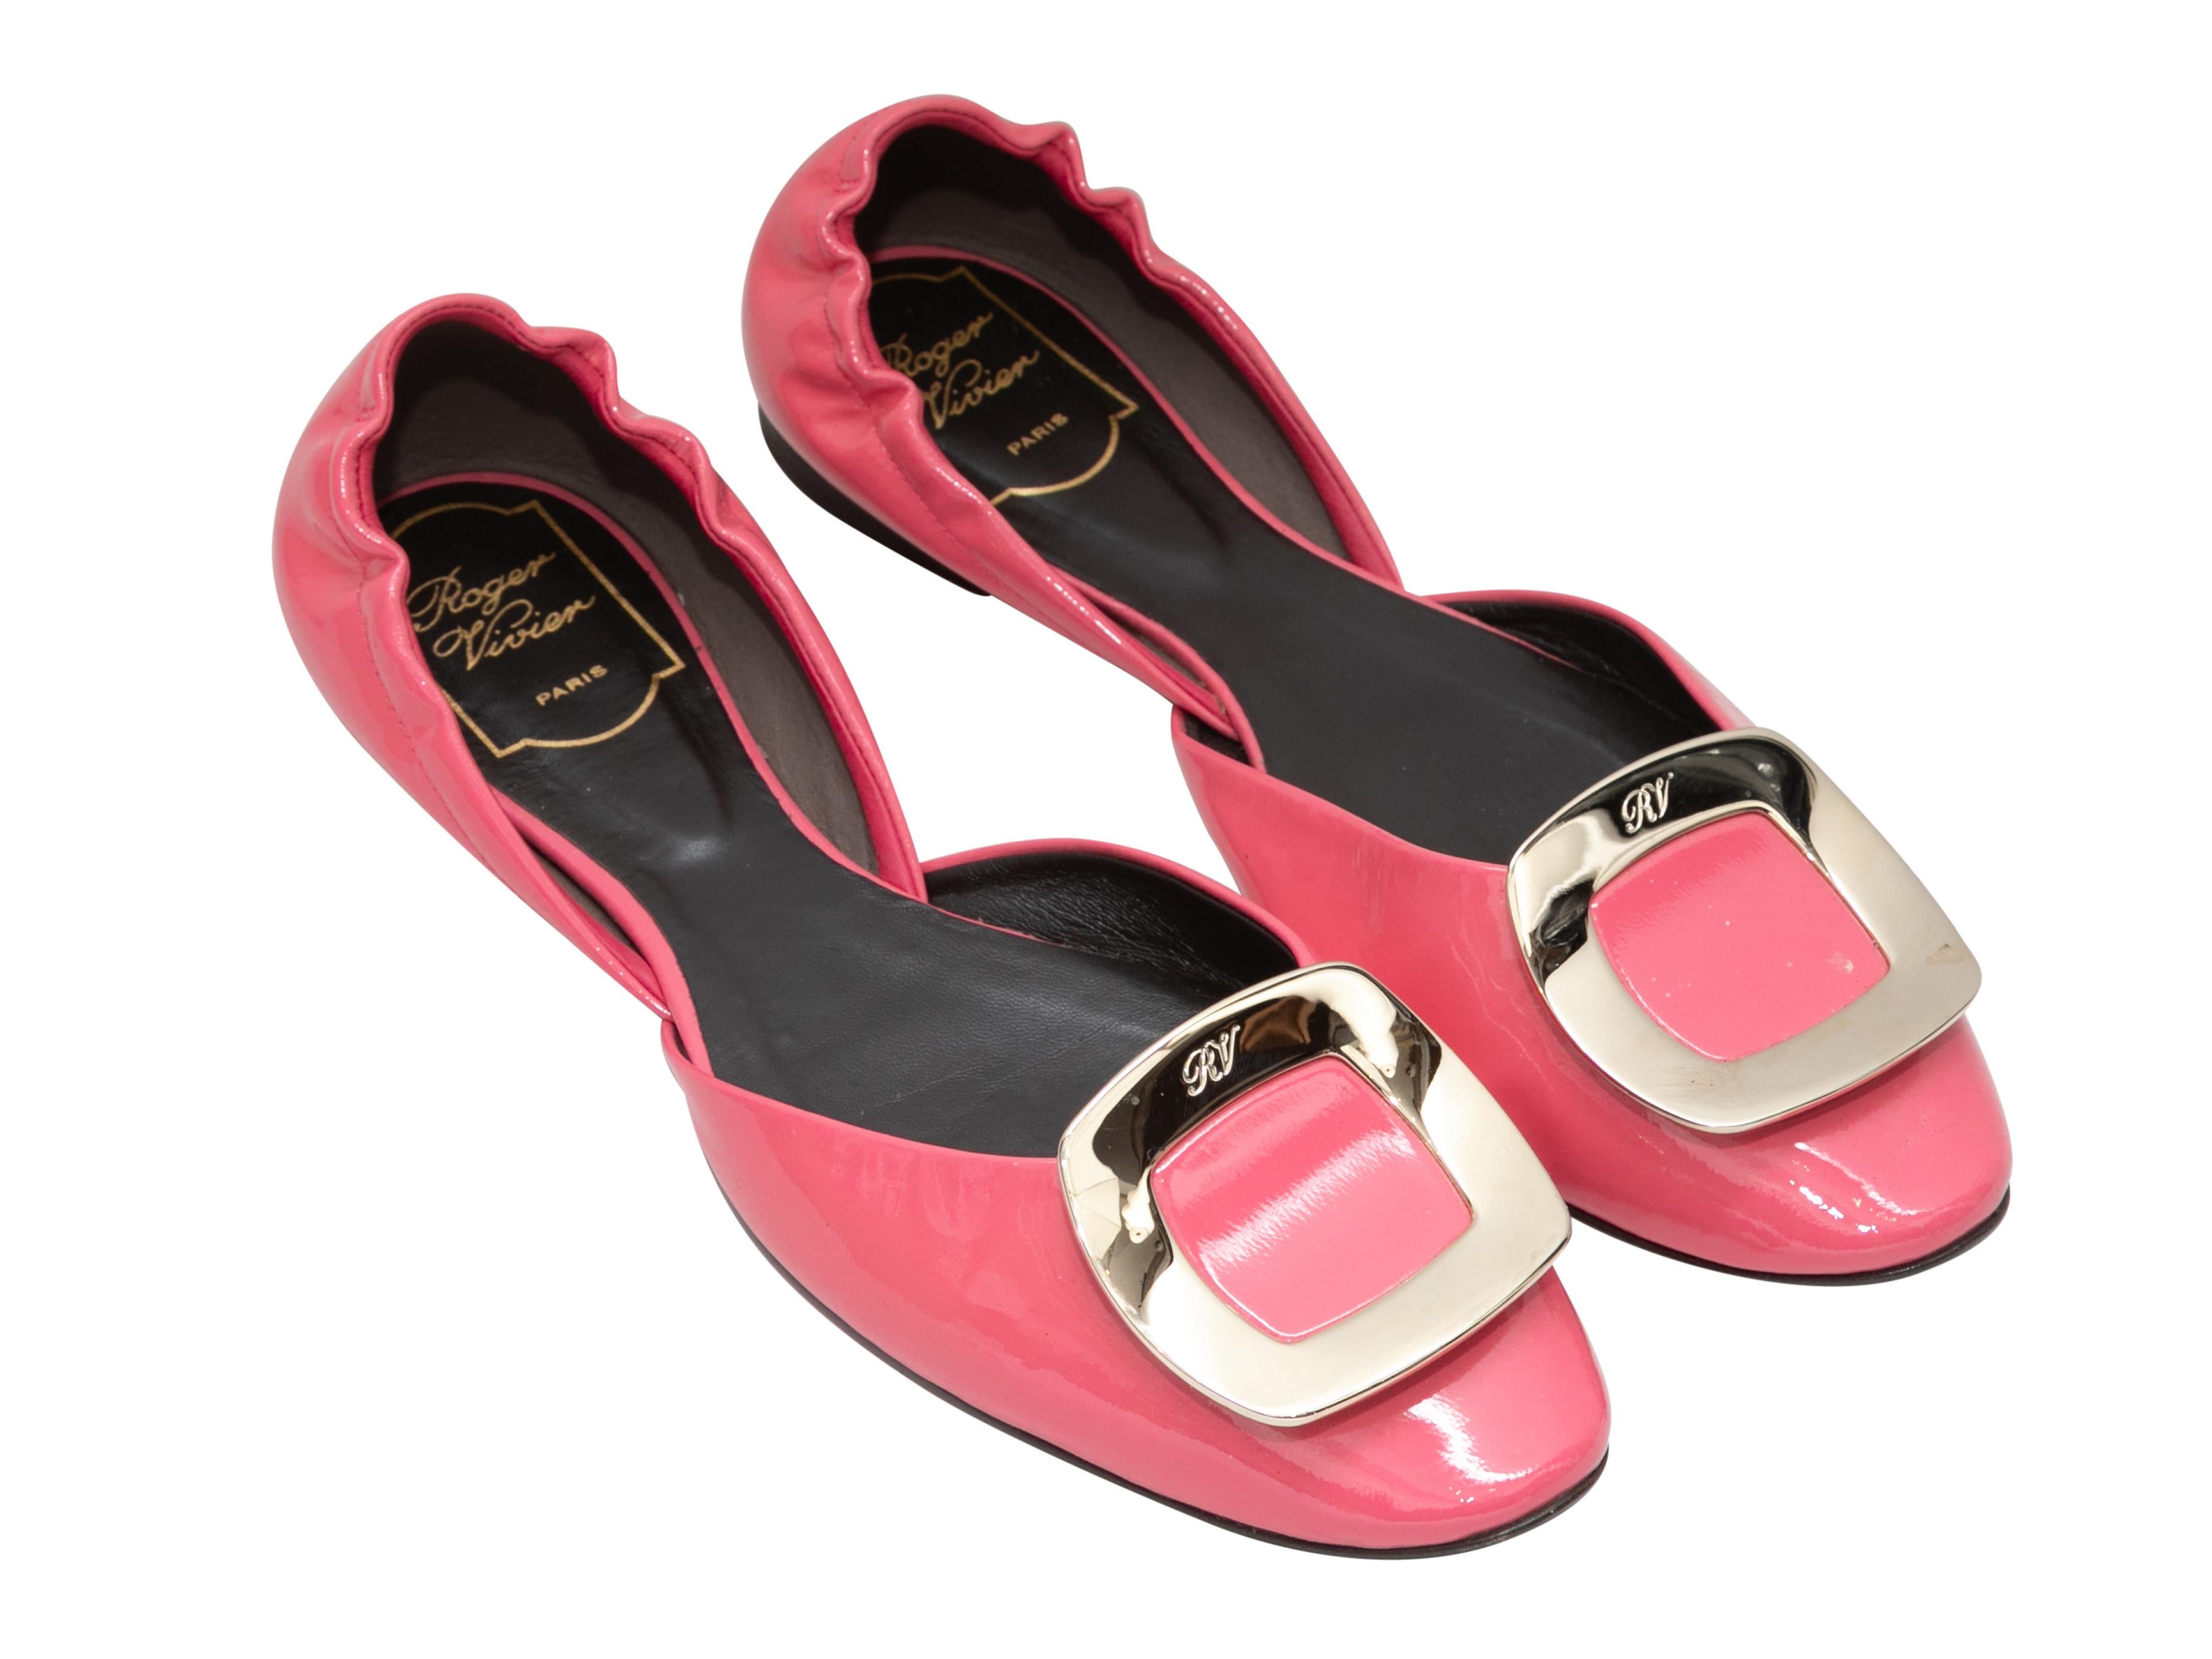 Pink patent leather d'Orsay ballet flats by Roger Vivier. Gold-tone buckle accents at tops.